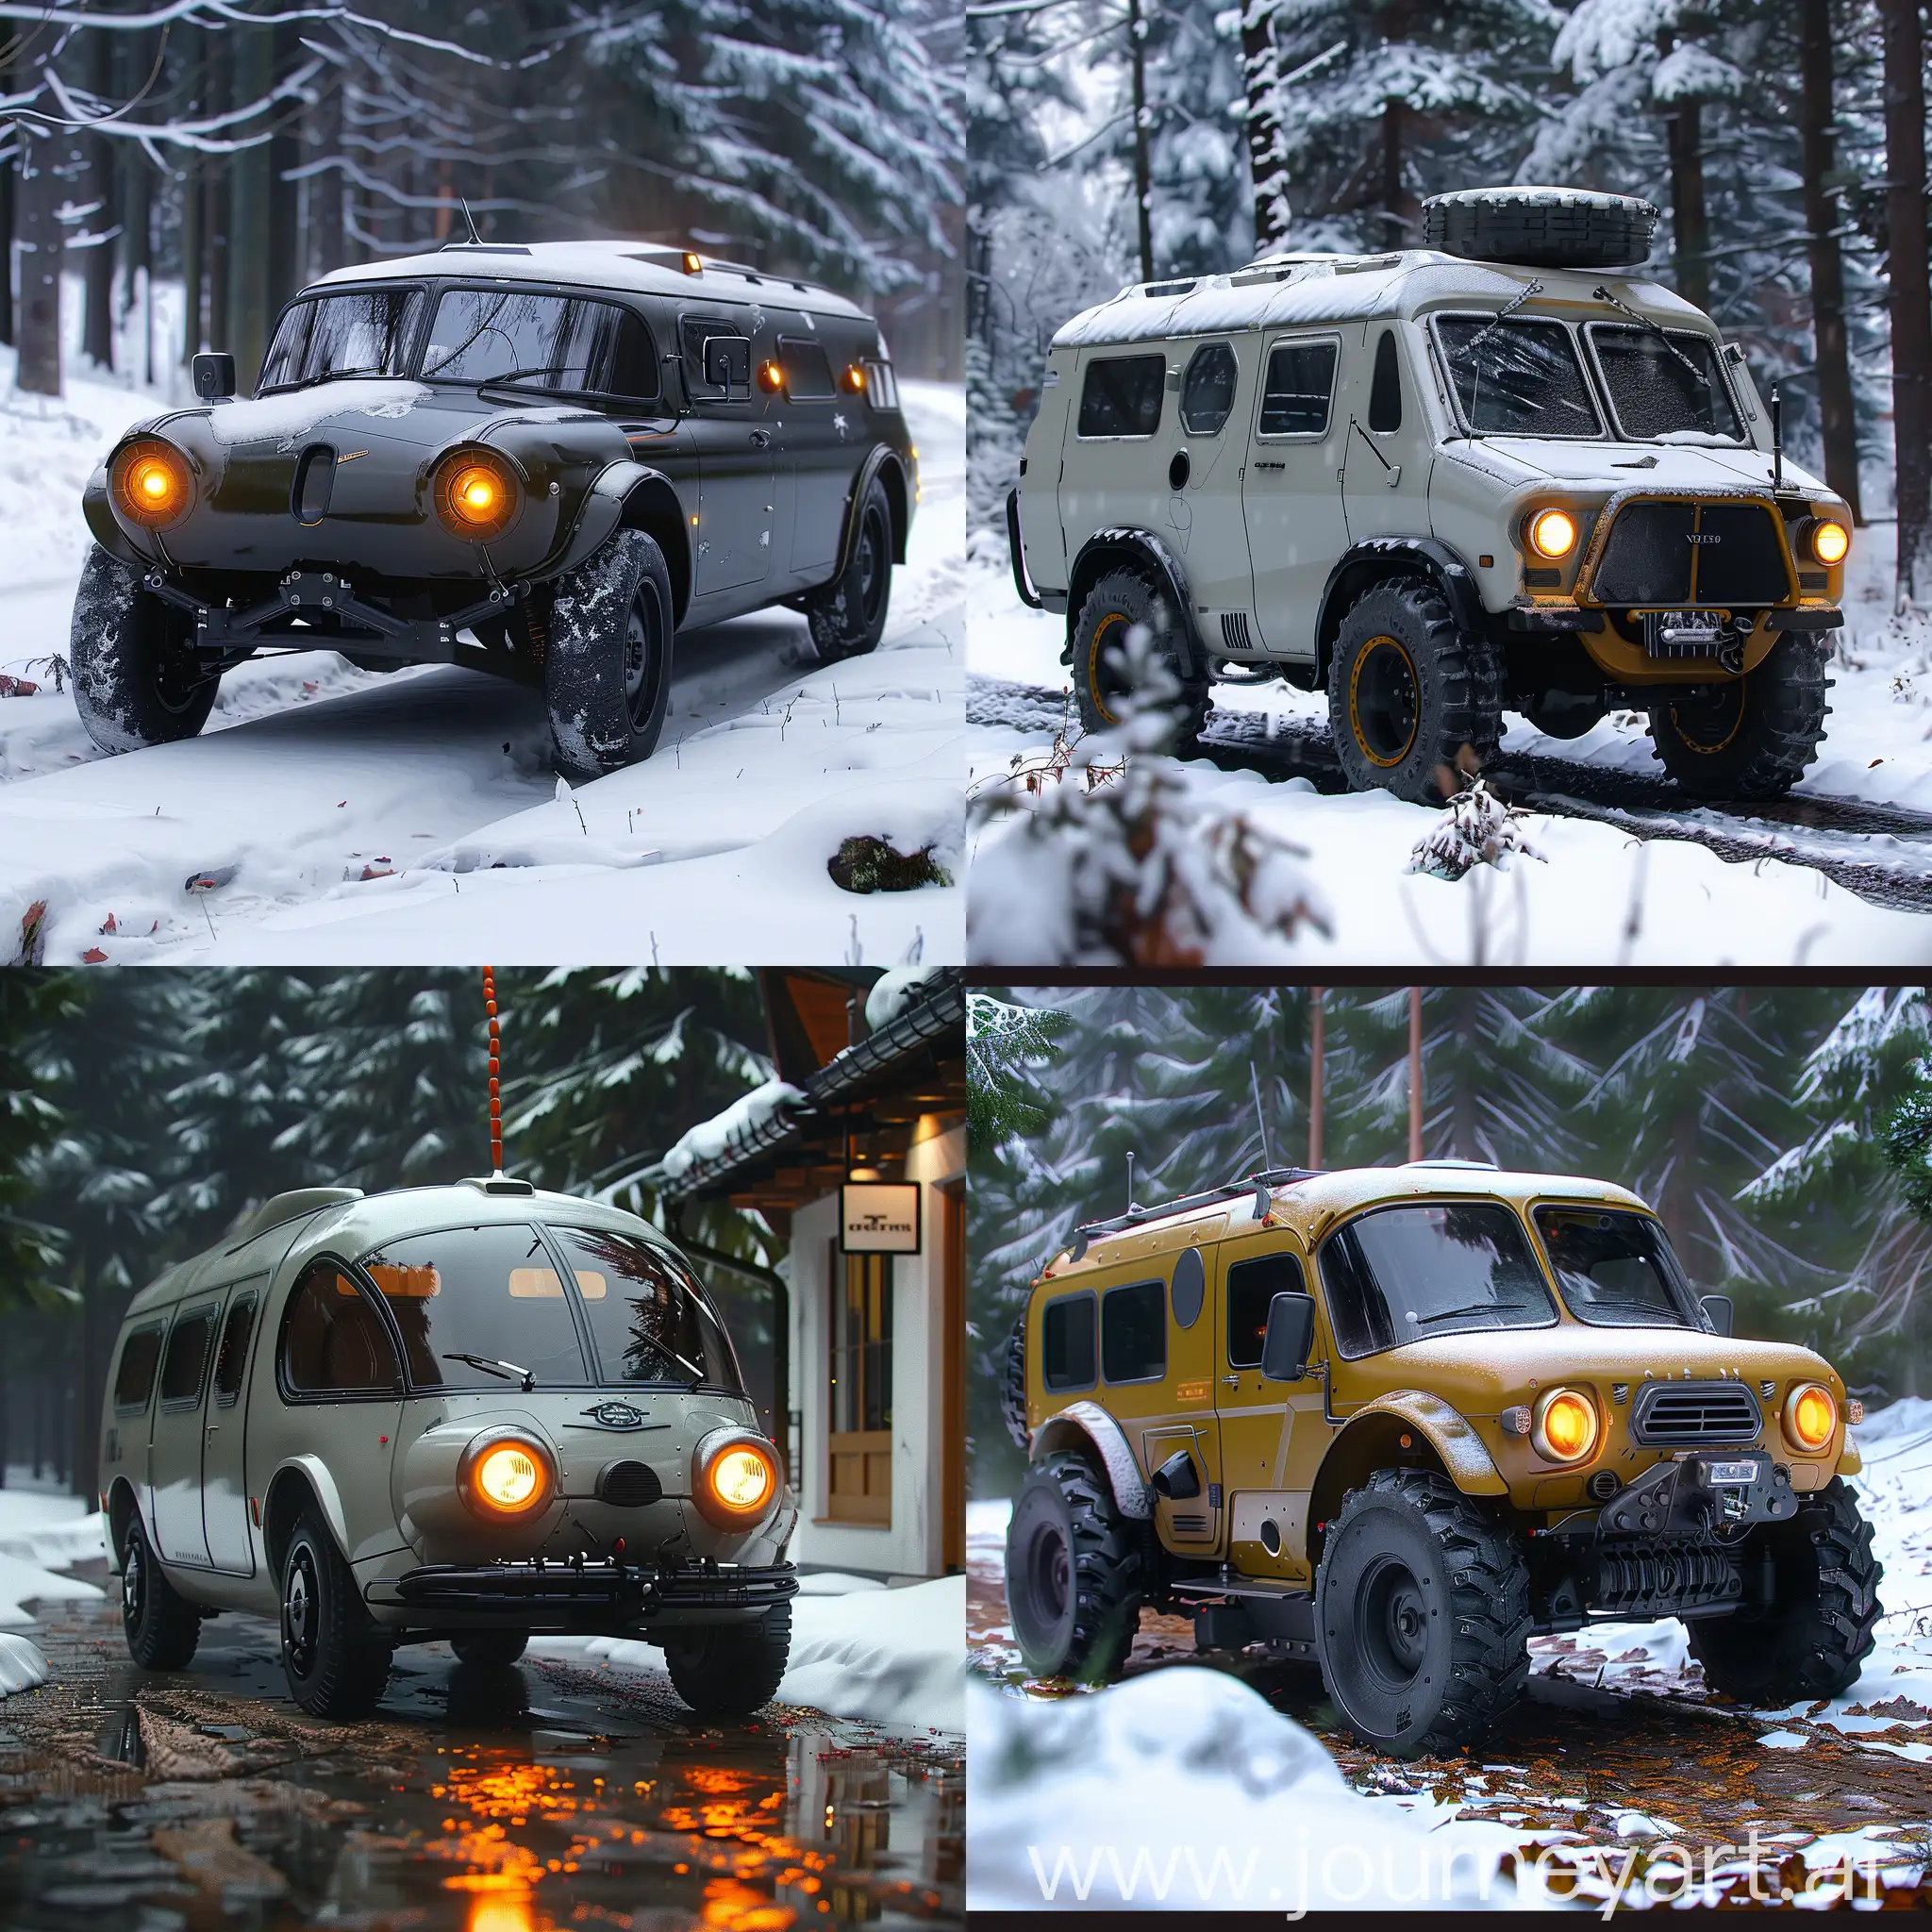 Futuristic UAZ-452 https://upload.wikimedia.org/wikipedia/commons/a/a1/UAZ-Bus.jpg, Electric Powertrain, Autonomous Driving, Advanced Connectivity, Advanced Safety Features, Augmented Reality Display, Biometric Authentication, Enhanced Comfort, Advanced Suspension System, Smart Storage Solutions, Voice Control System, Zero-Emission Hydrogen Fuel Cell, Self-Healing Body Panels, Vertical Takeoff and Landing (VTOL) Capability, Biodegradable and Recyclable Materials, Holographic Heads-Up Display, Advanced Energy Storage System, Bio-AI Assistant, Mood-Enhancing Interior Lighting, Integrated Vertical Farming System, Universal Translator System, octane render --stylize 1000